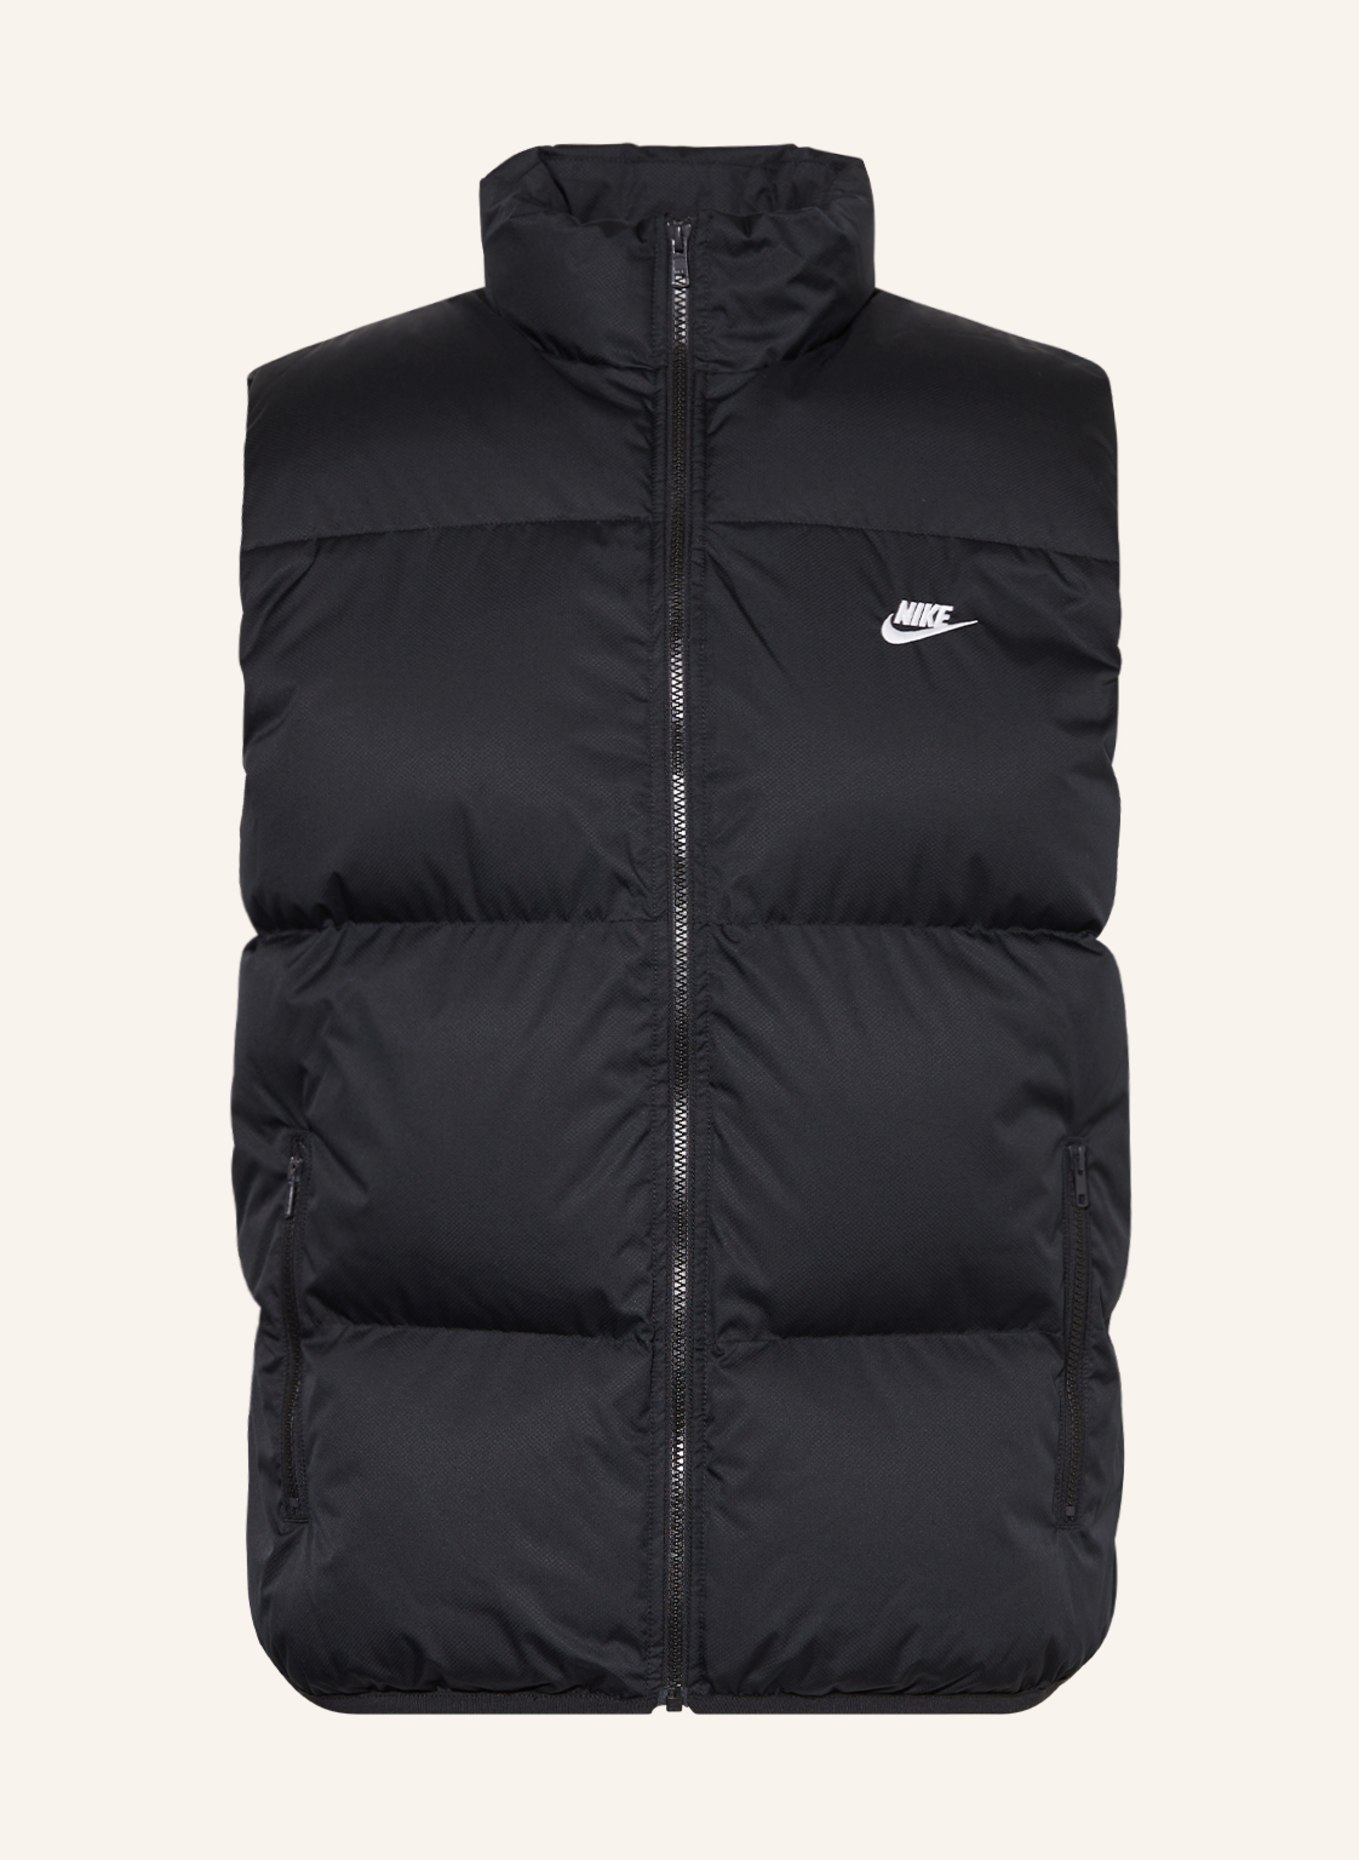 Nike Quilted vest in black